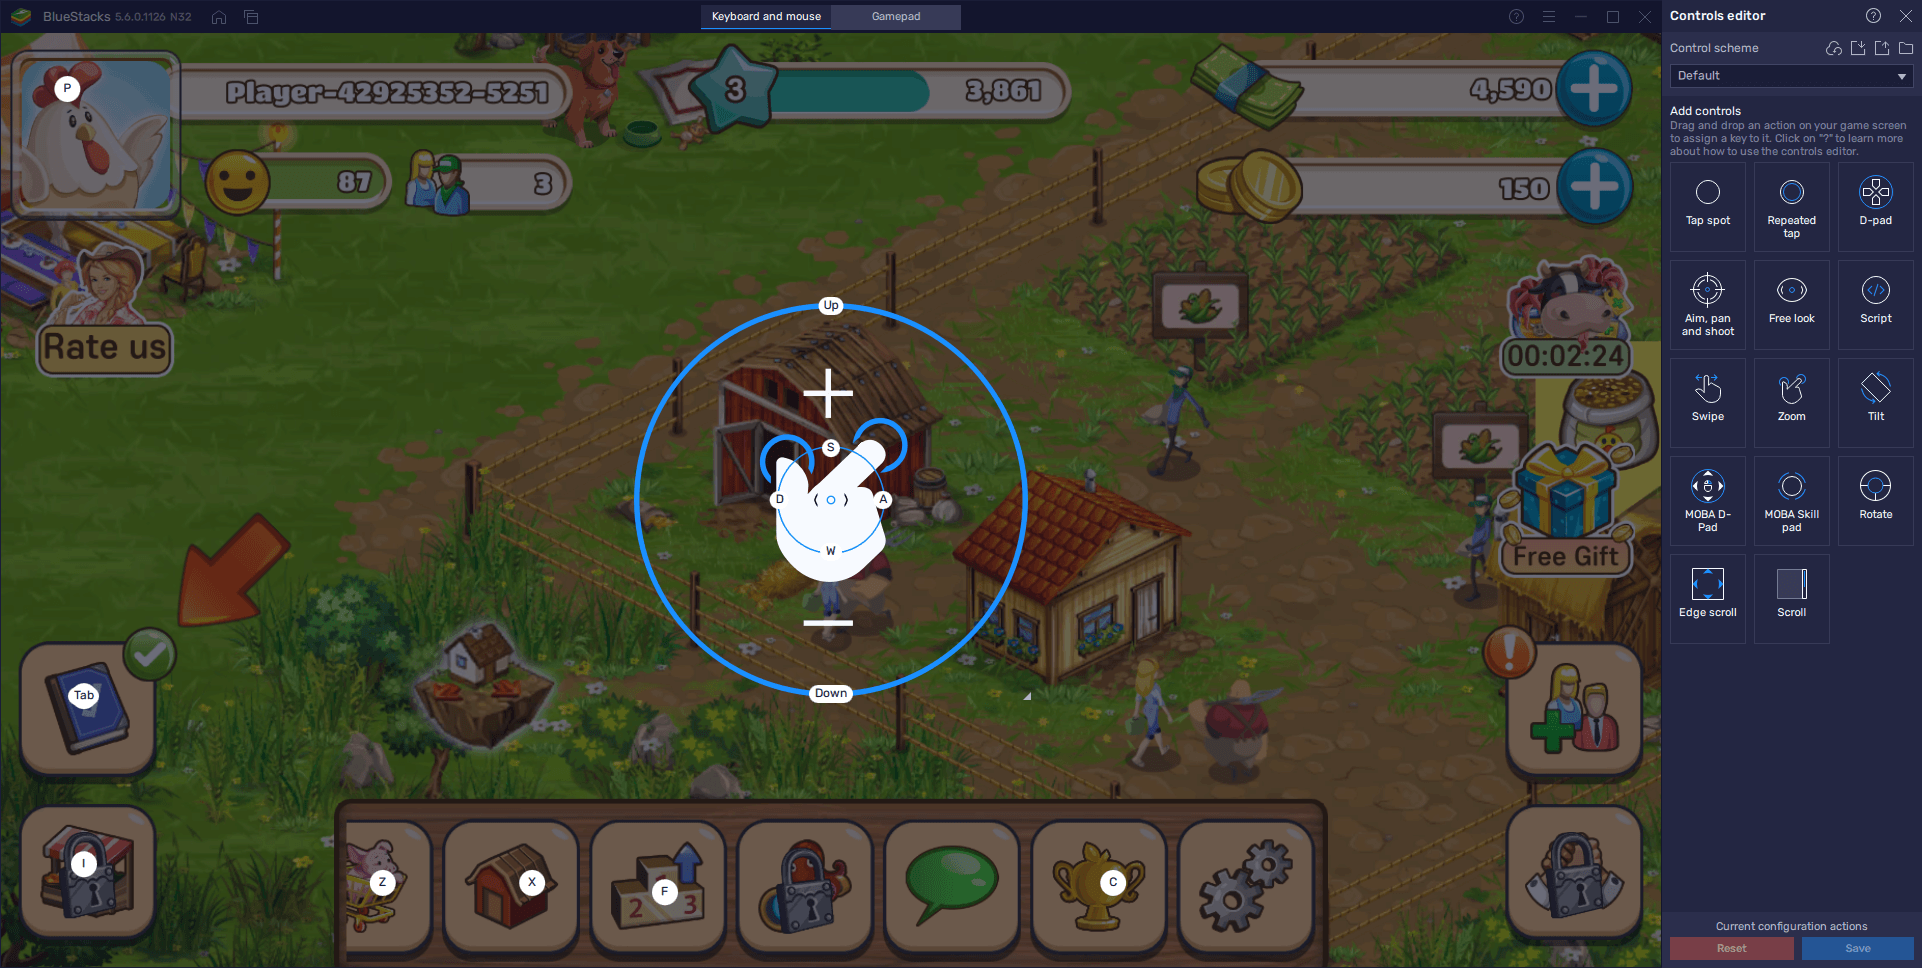 Big Farm: Mobile Harvest on PC - How to Optimize, Streamline, and Expedite Your Farm Development with our BlueStacks Tools